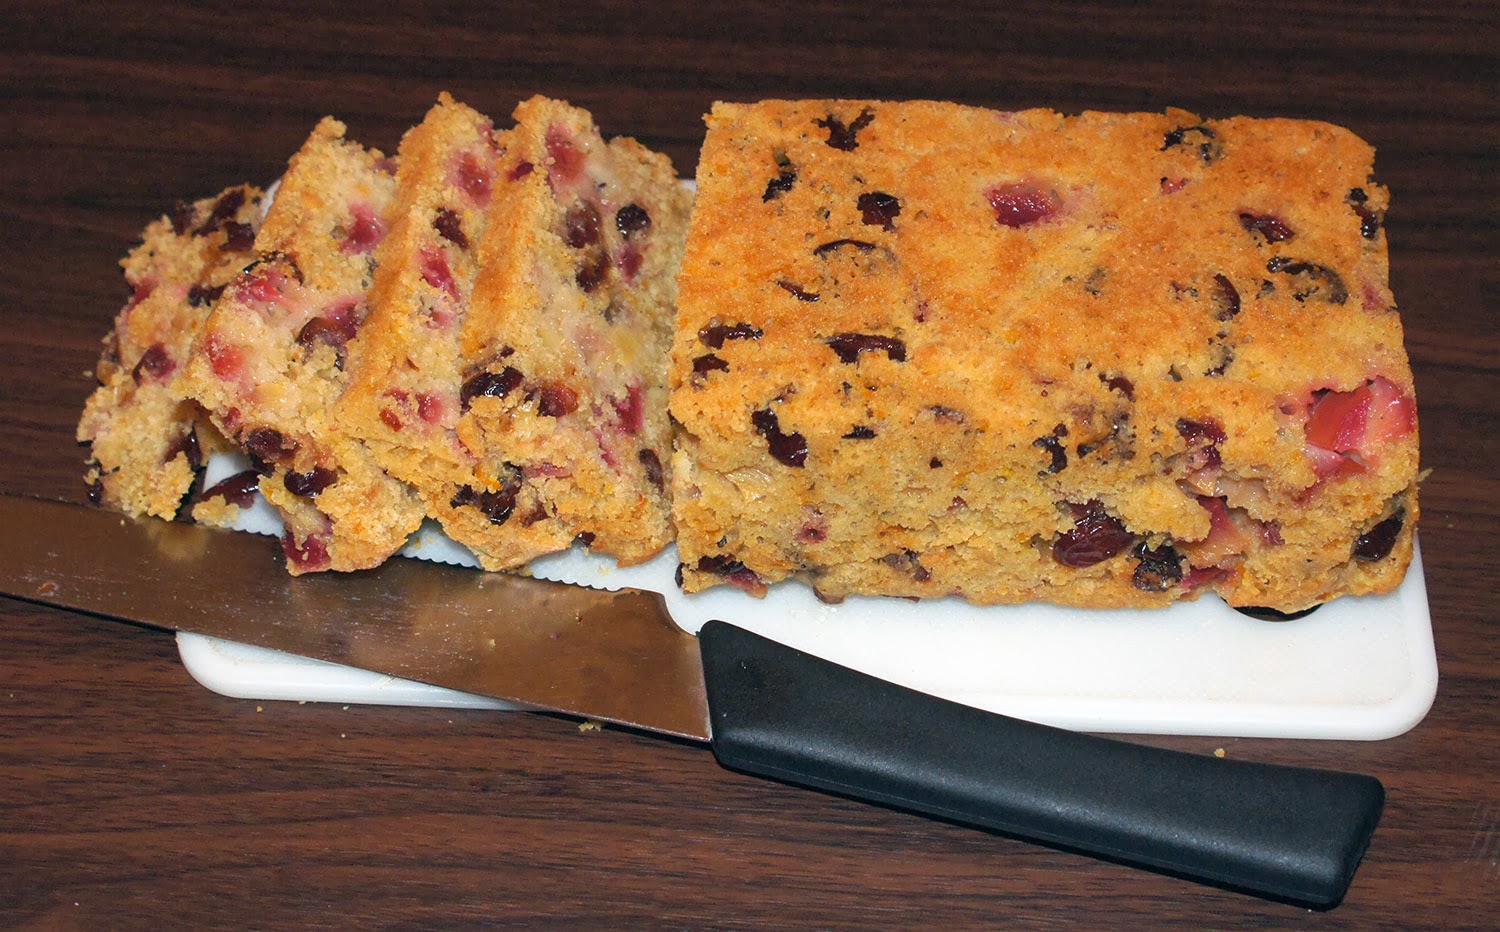 Christmas Fruited Quickbread: A fruited Christmas cake, based on a muffin recipe that can be prepared either as a cake or as a pudding. An excellent choice if you want a lighter Christmas cake or pudding